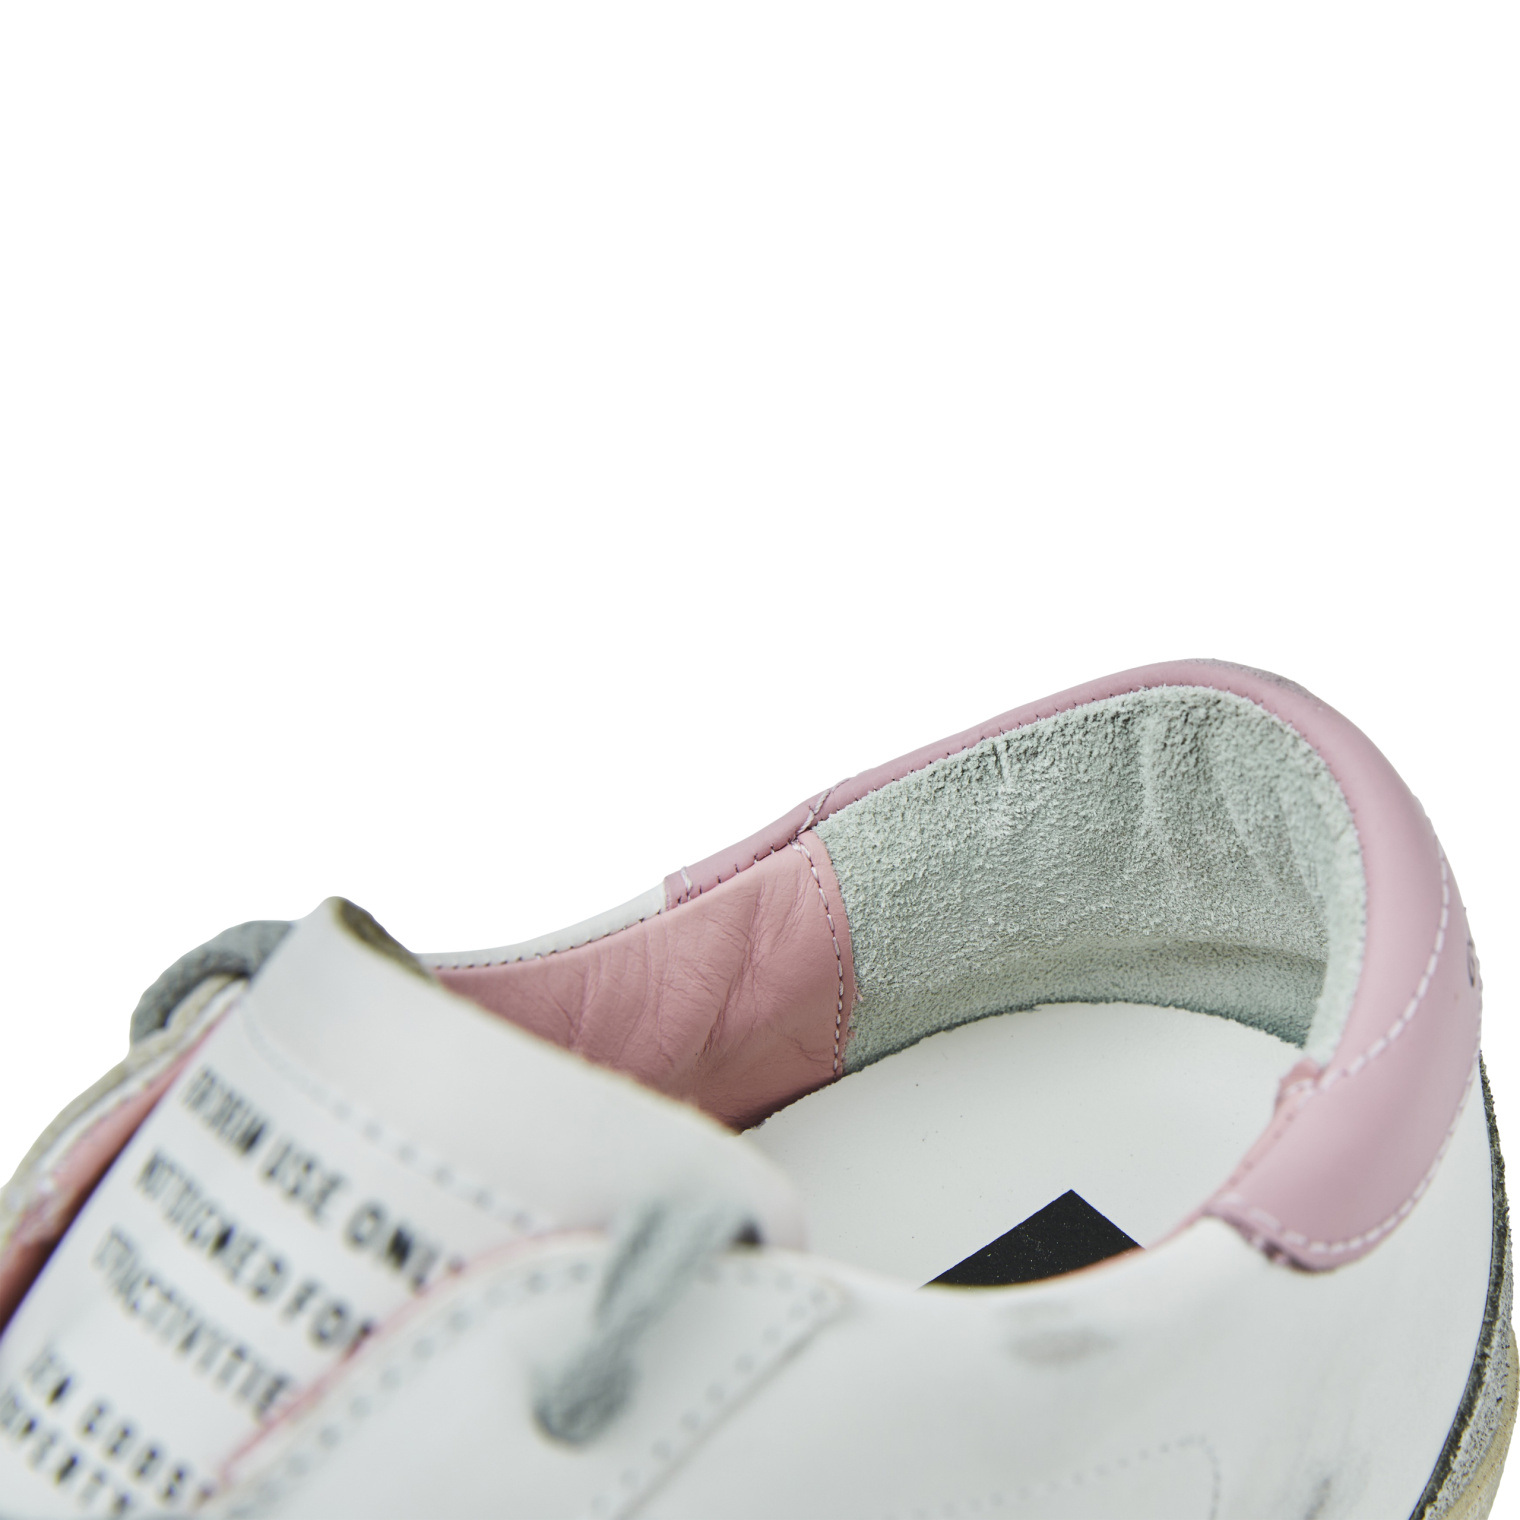 Golden Goose Super Star leather sneakers